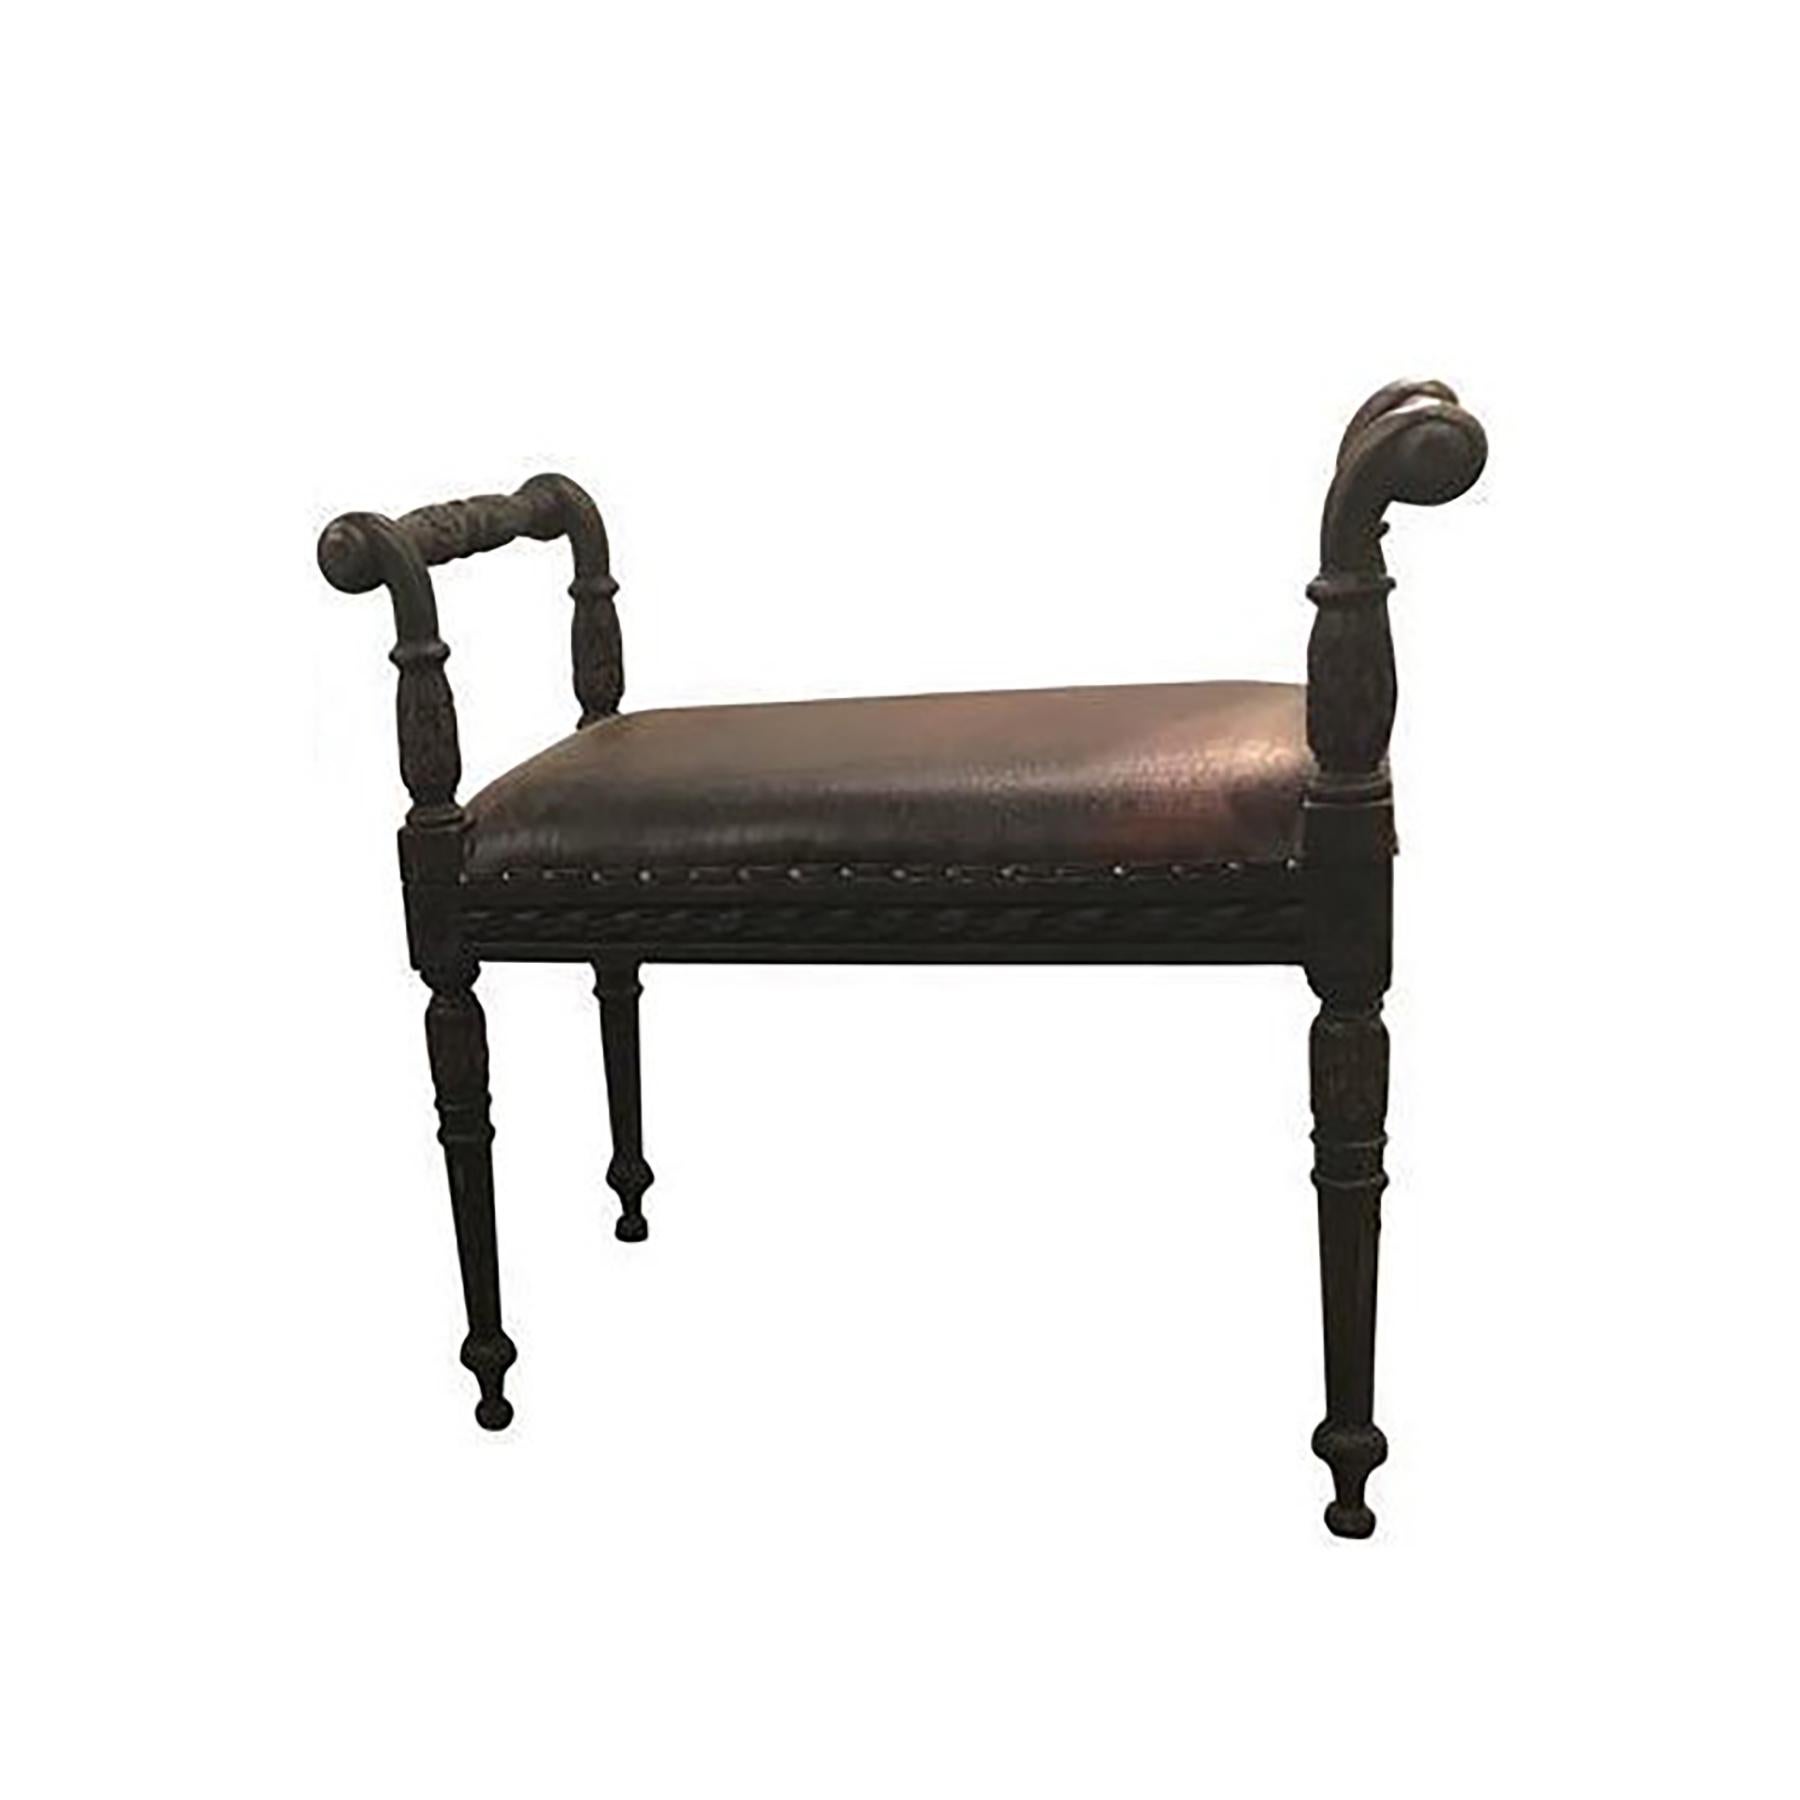 Louis XVI style French carved footstool or bench. Ebony finish. The carved frame supports a covered seat in faux alligator upholstery. Flanked by side arms. Measure: Seat height 18.5 inches.